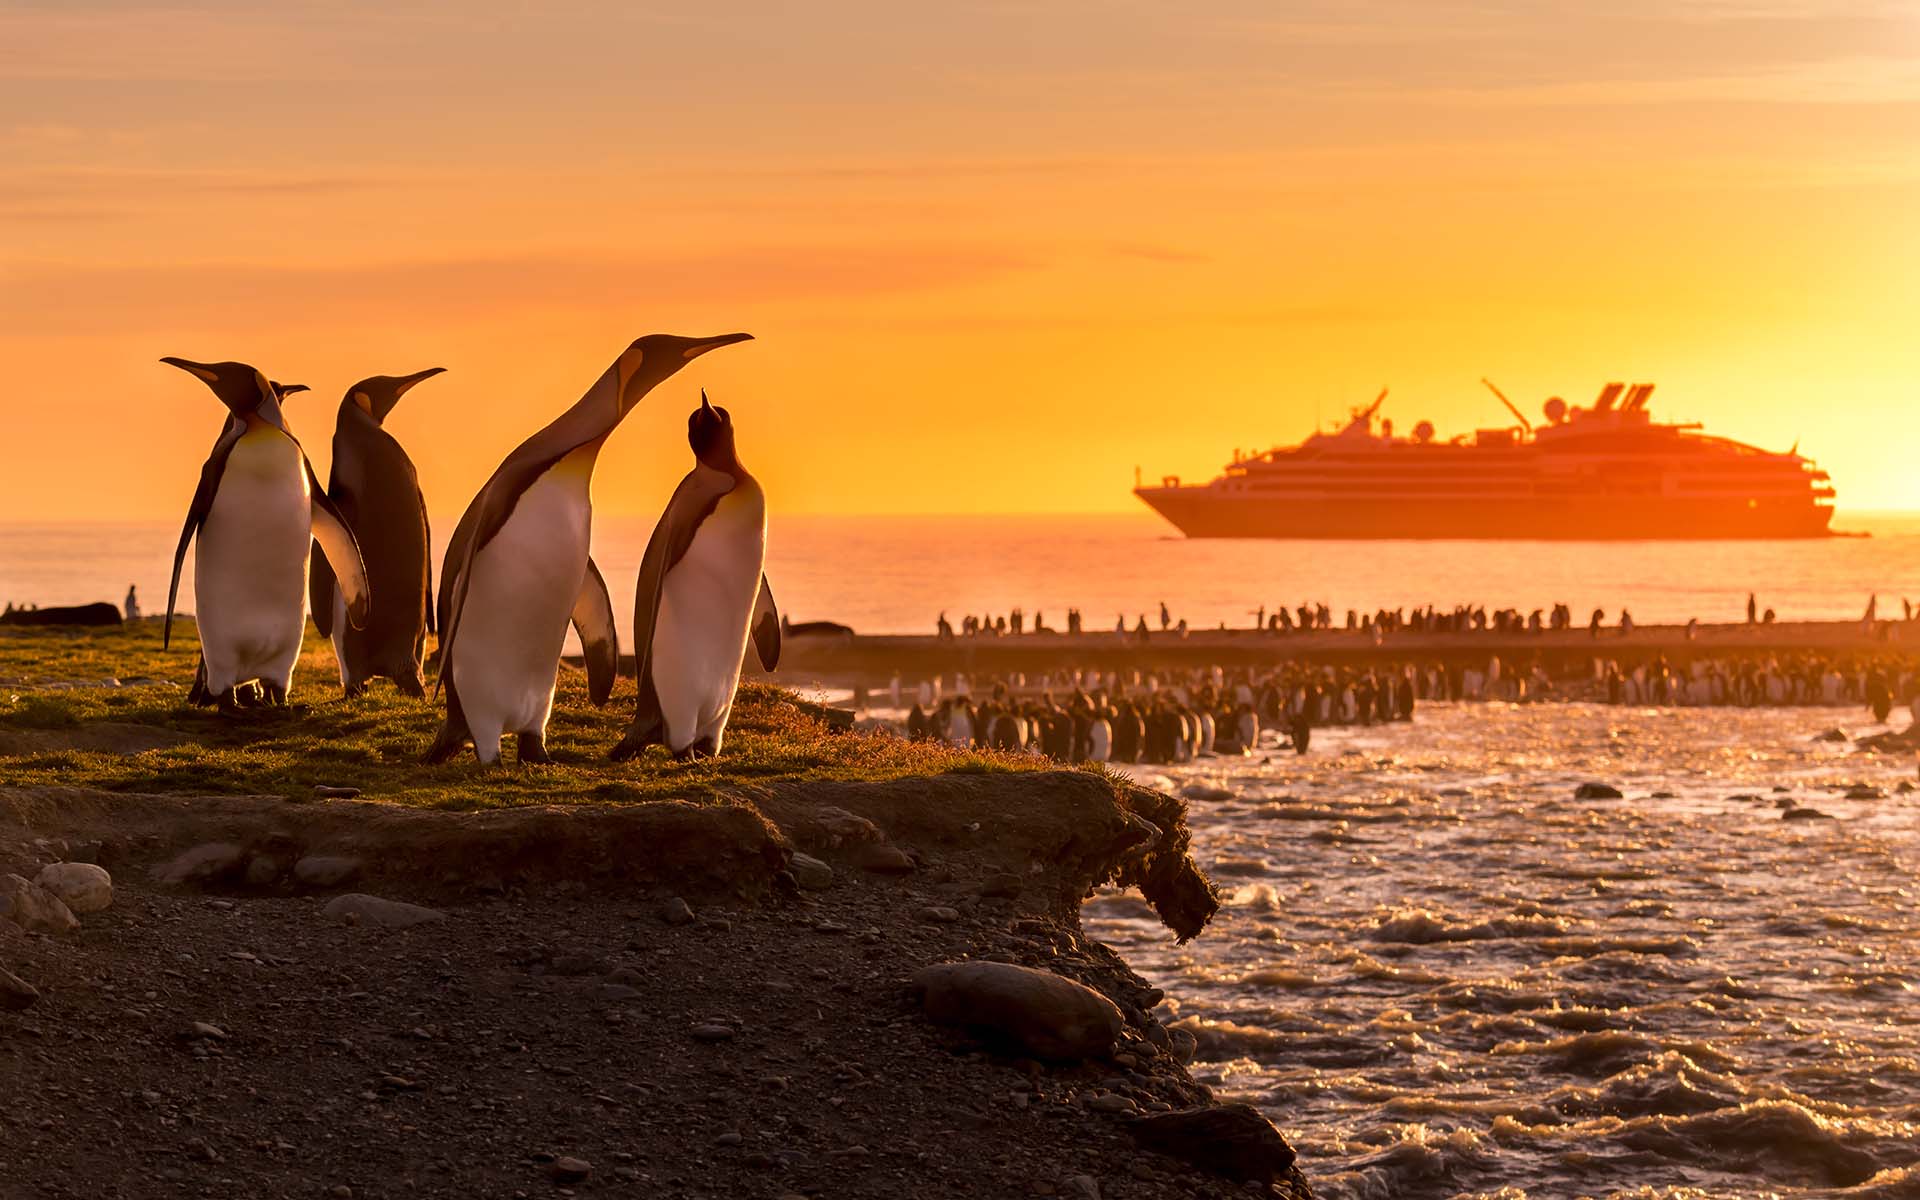 A vivid yellow orange sunset in Antarctica's South George Island. A colony of king penguin occupy the land as a ship floats offshore.